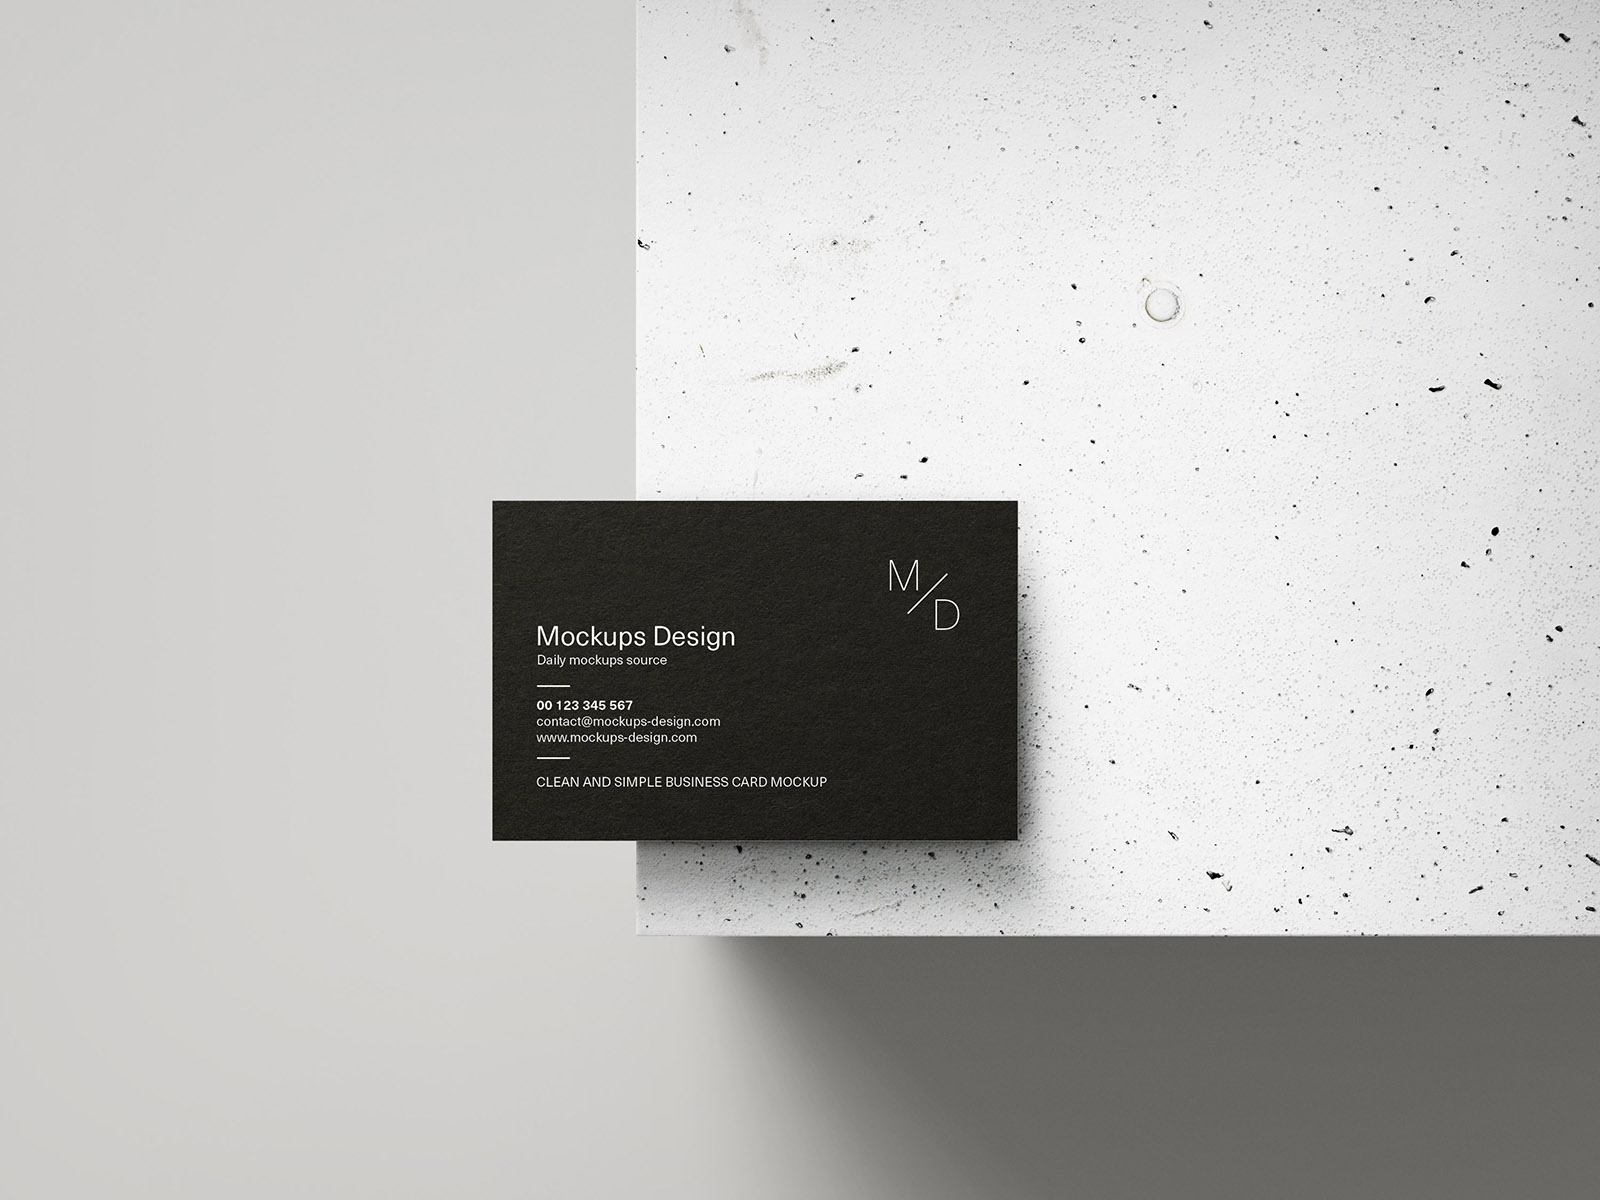 Business cards on concrete cube mockup